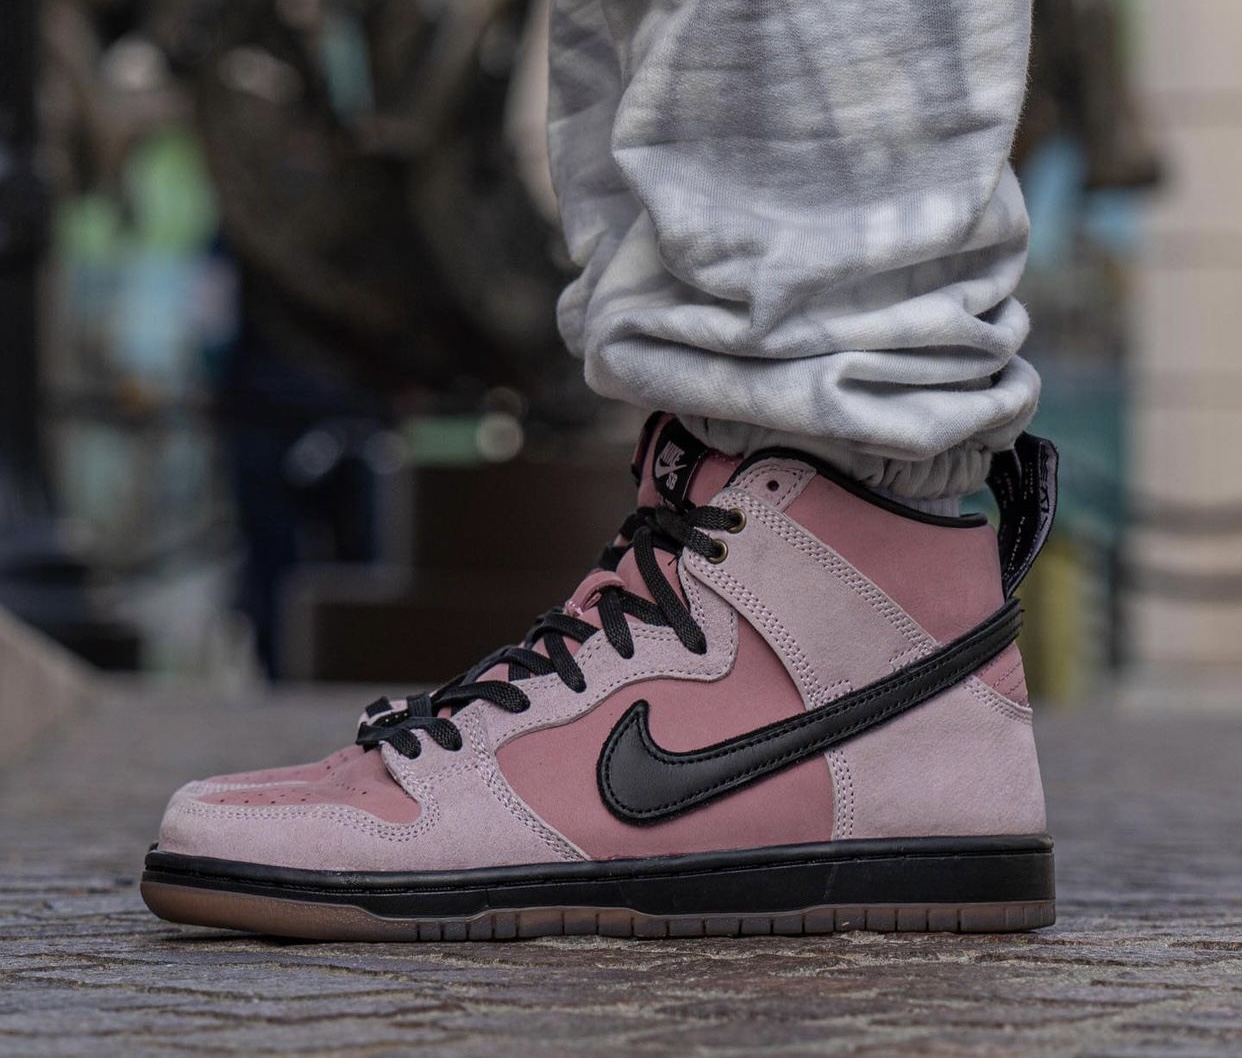 KCDC Nike SB Dunk High DH7742 600 Release Date On Feet 2